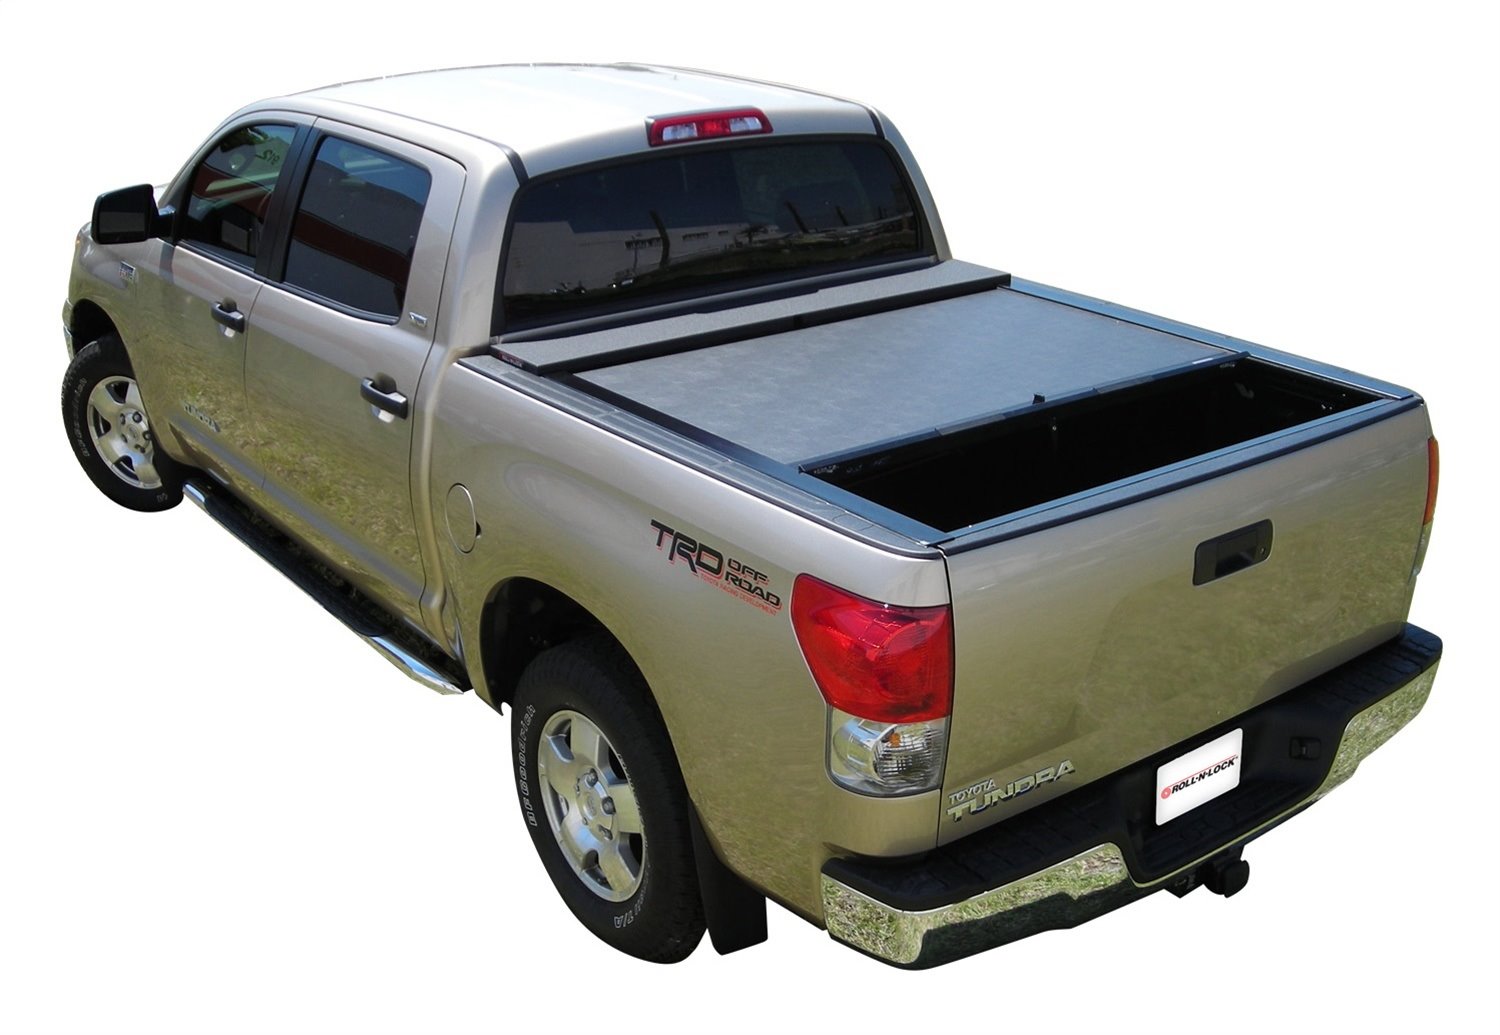 LG576M M-Series Locking Retractable Truck Bed Cover for Select Toyota Tundra [6.7 ft. Bed]